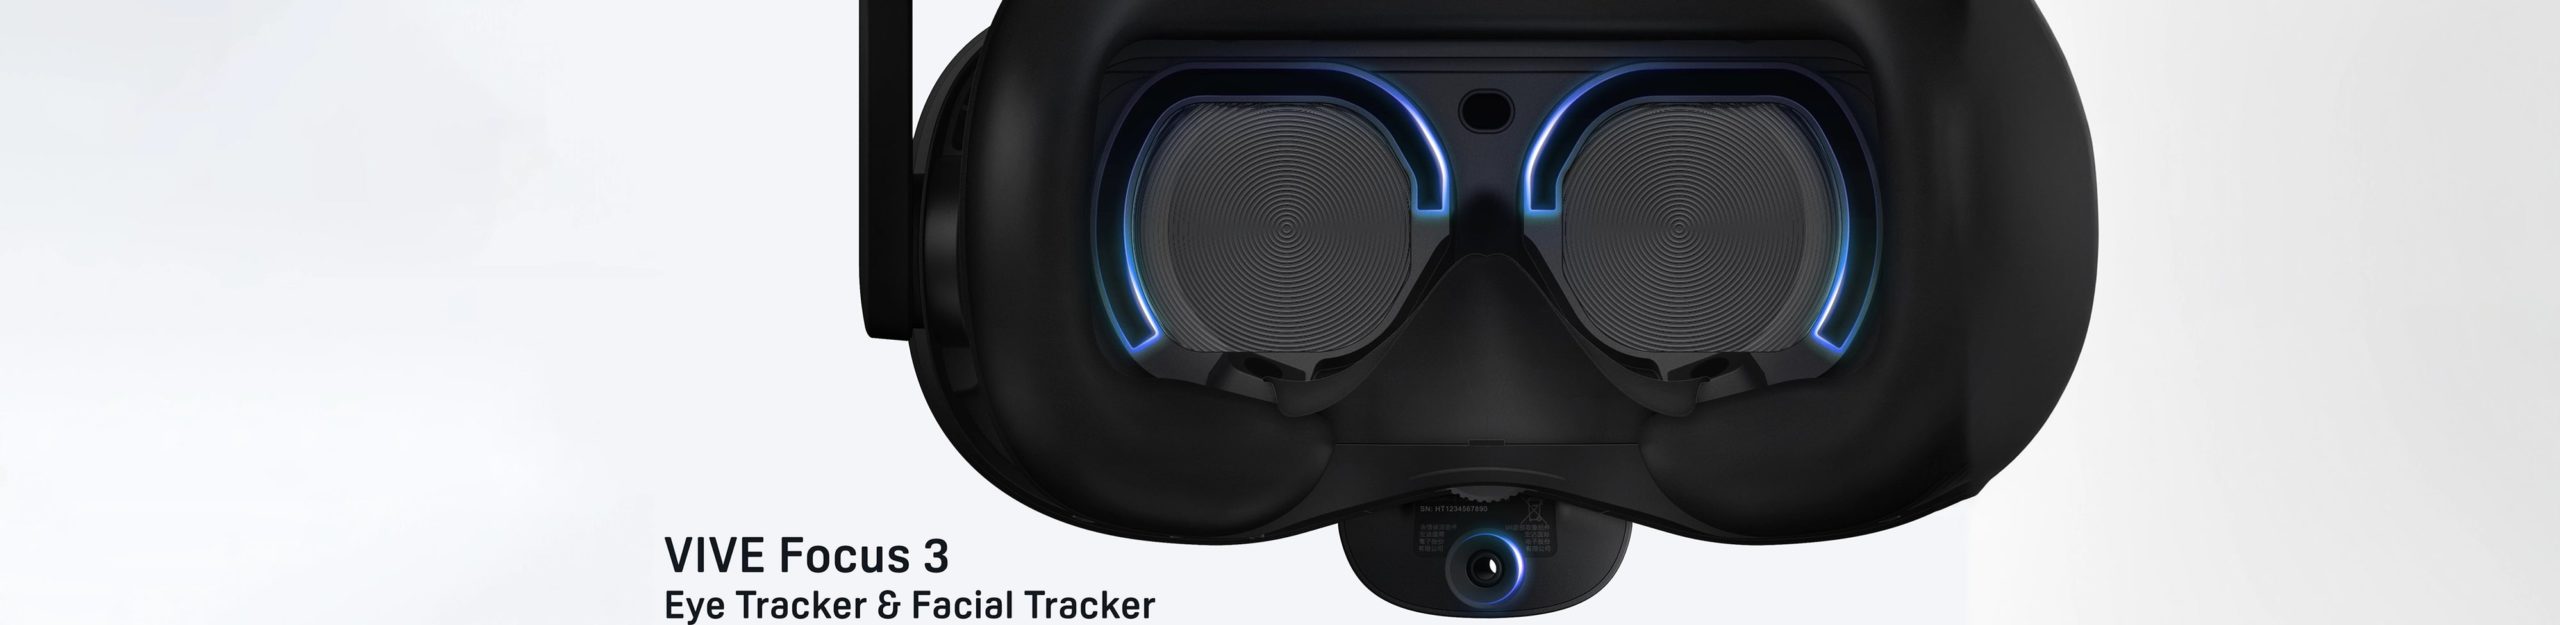 HTC VIVE Enhances VR Experiences with Focus 3 Facial and Eye Trackers